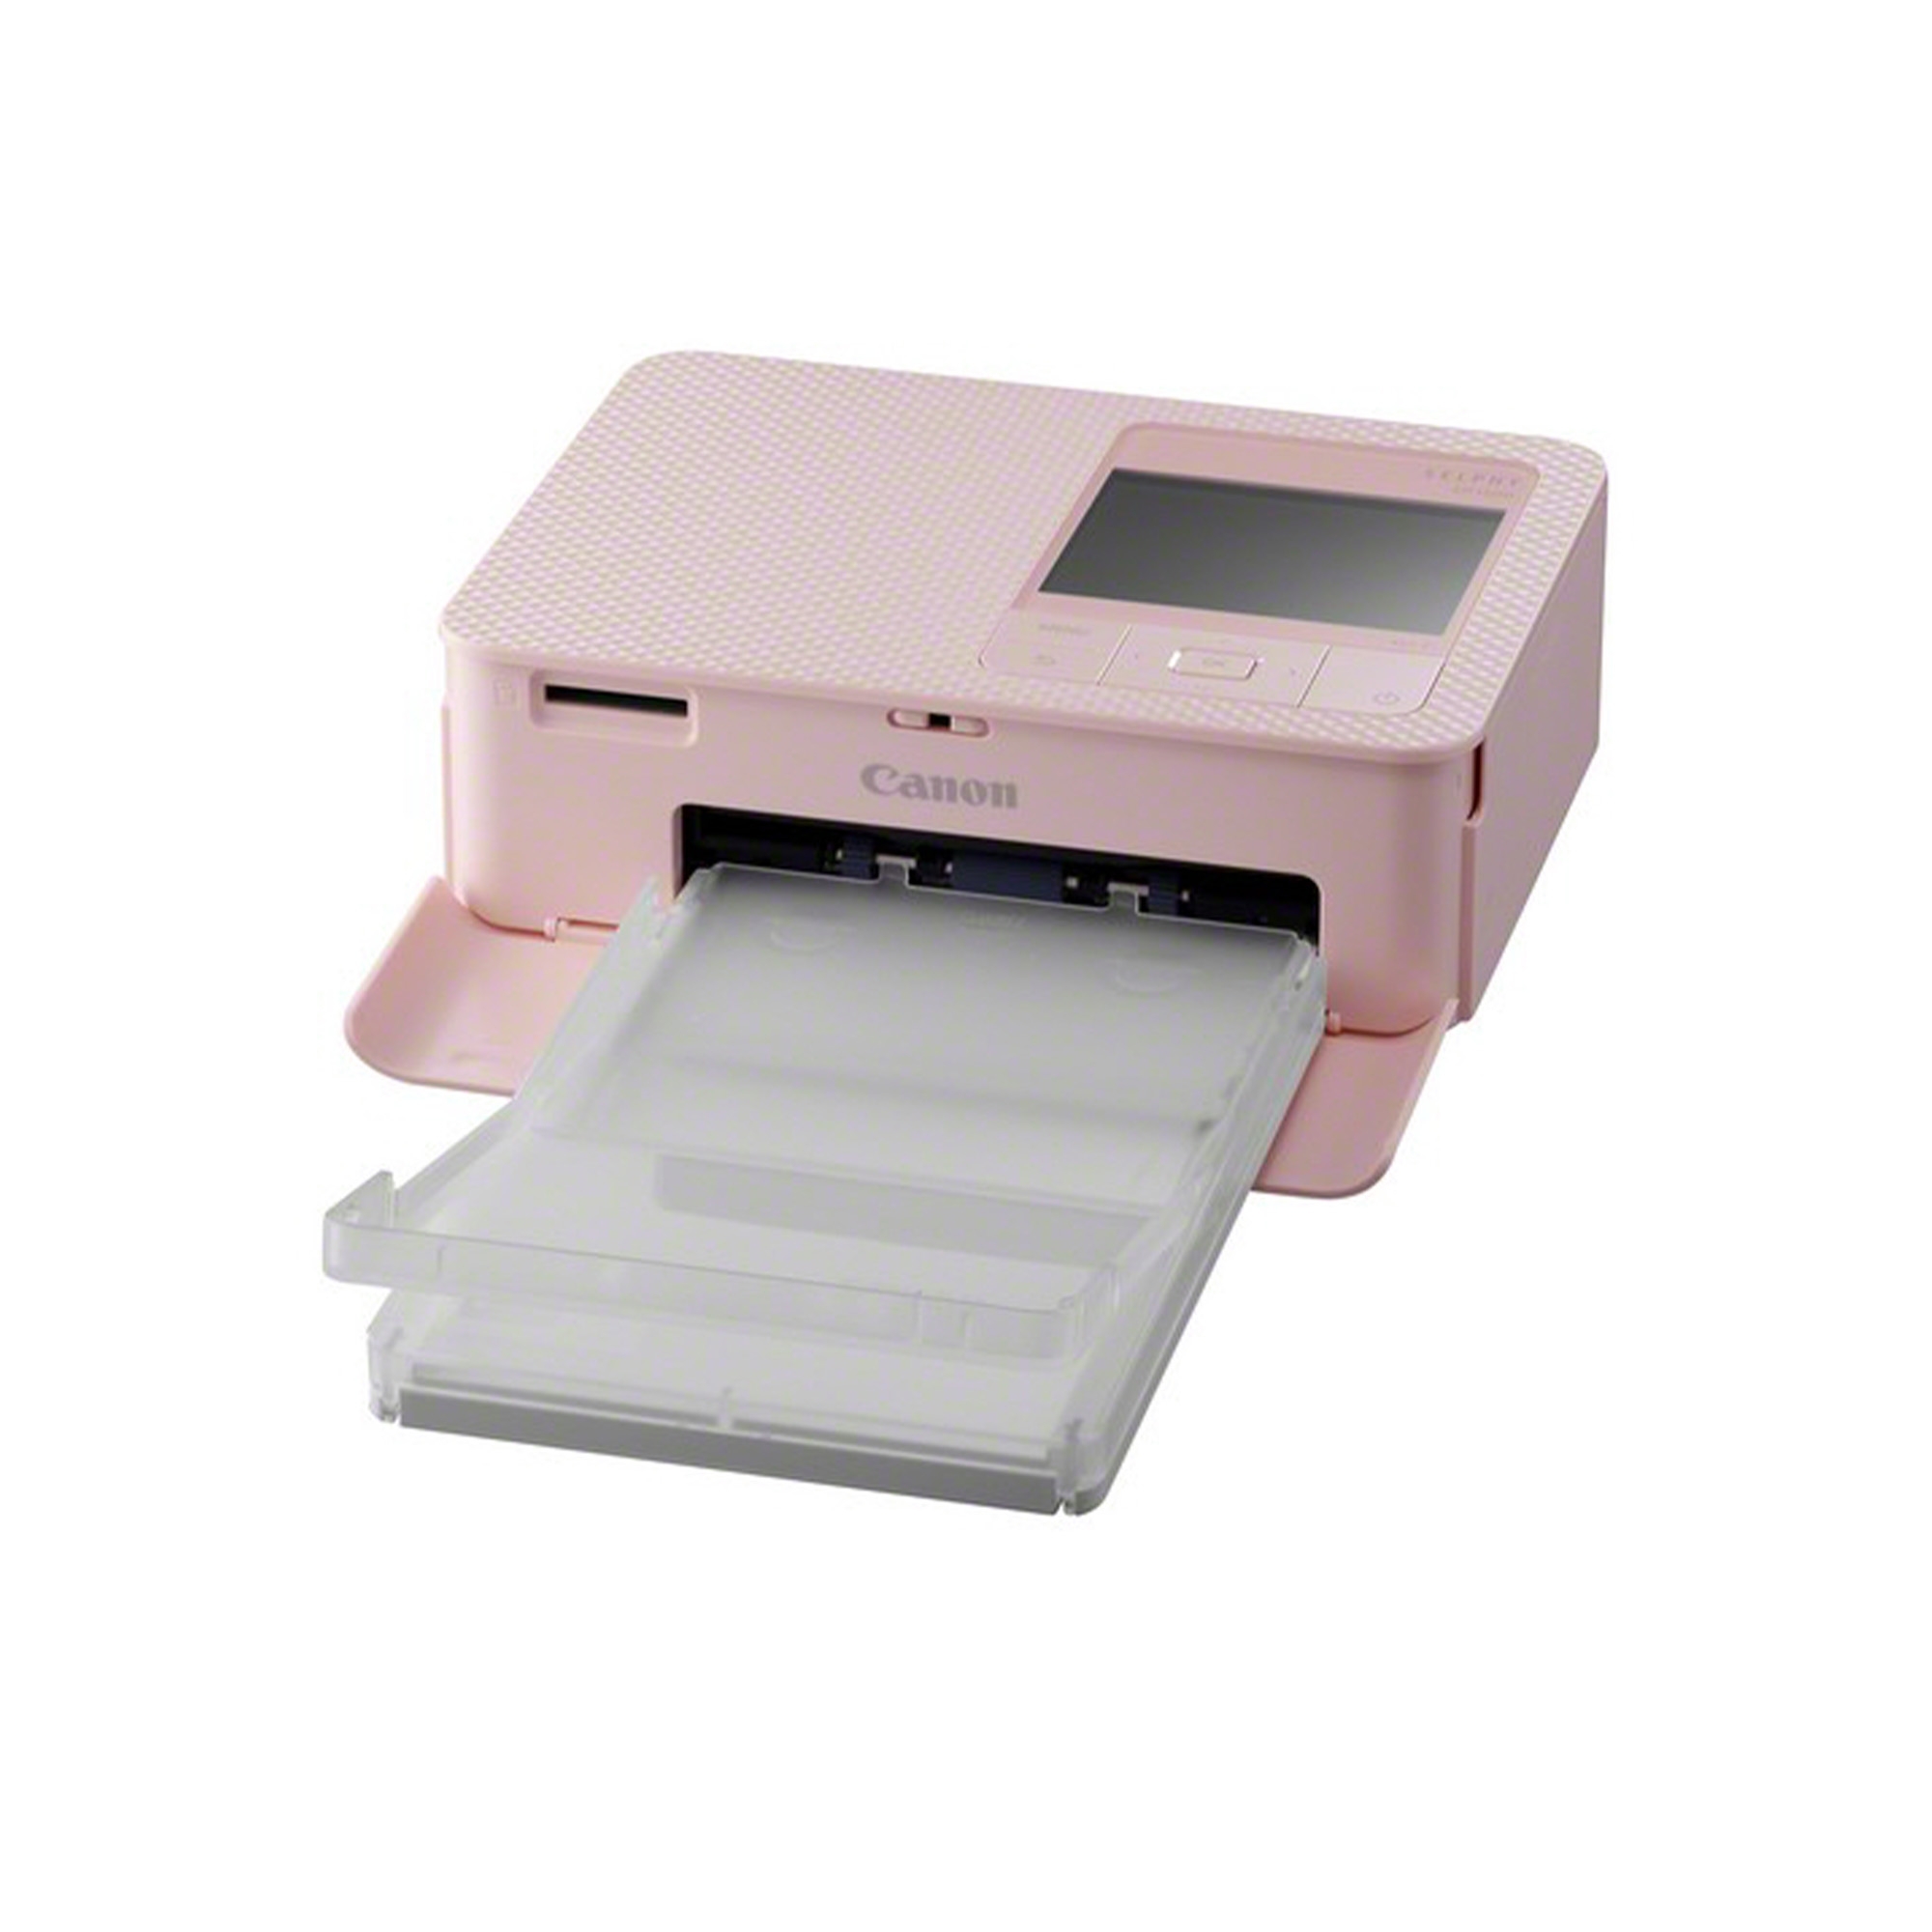 Canon Selphy Cp1500 Instant Printer Pink Castle Cameras 8885